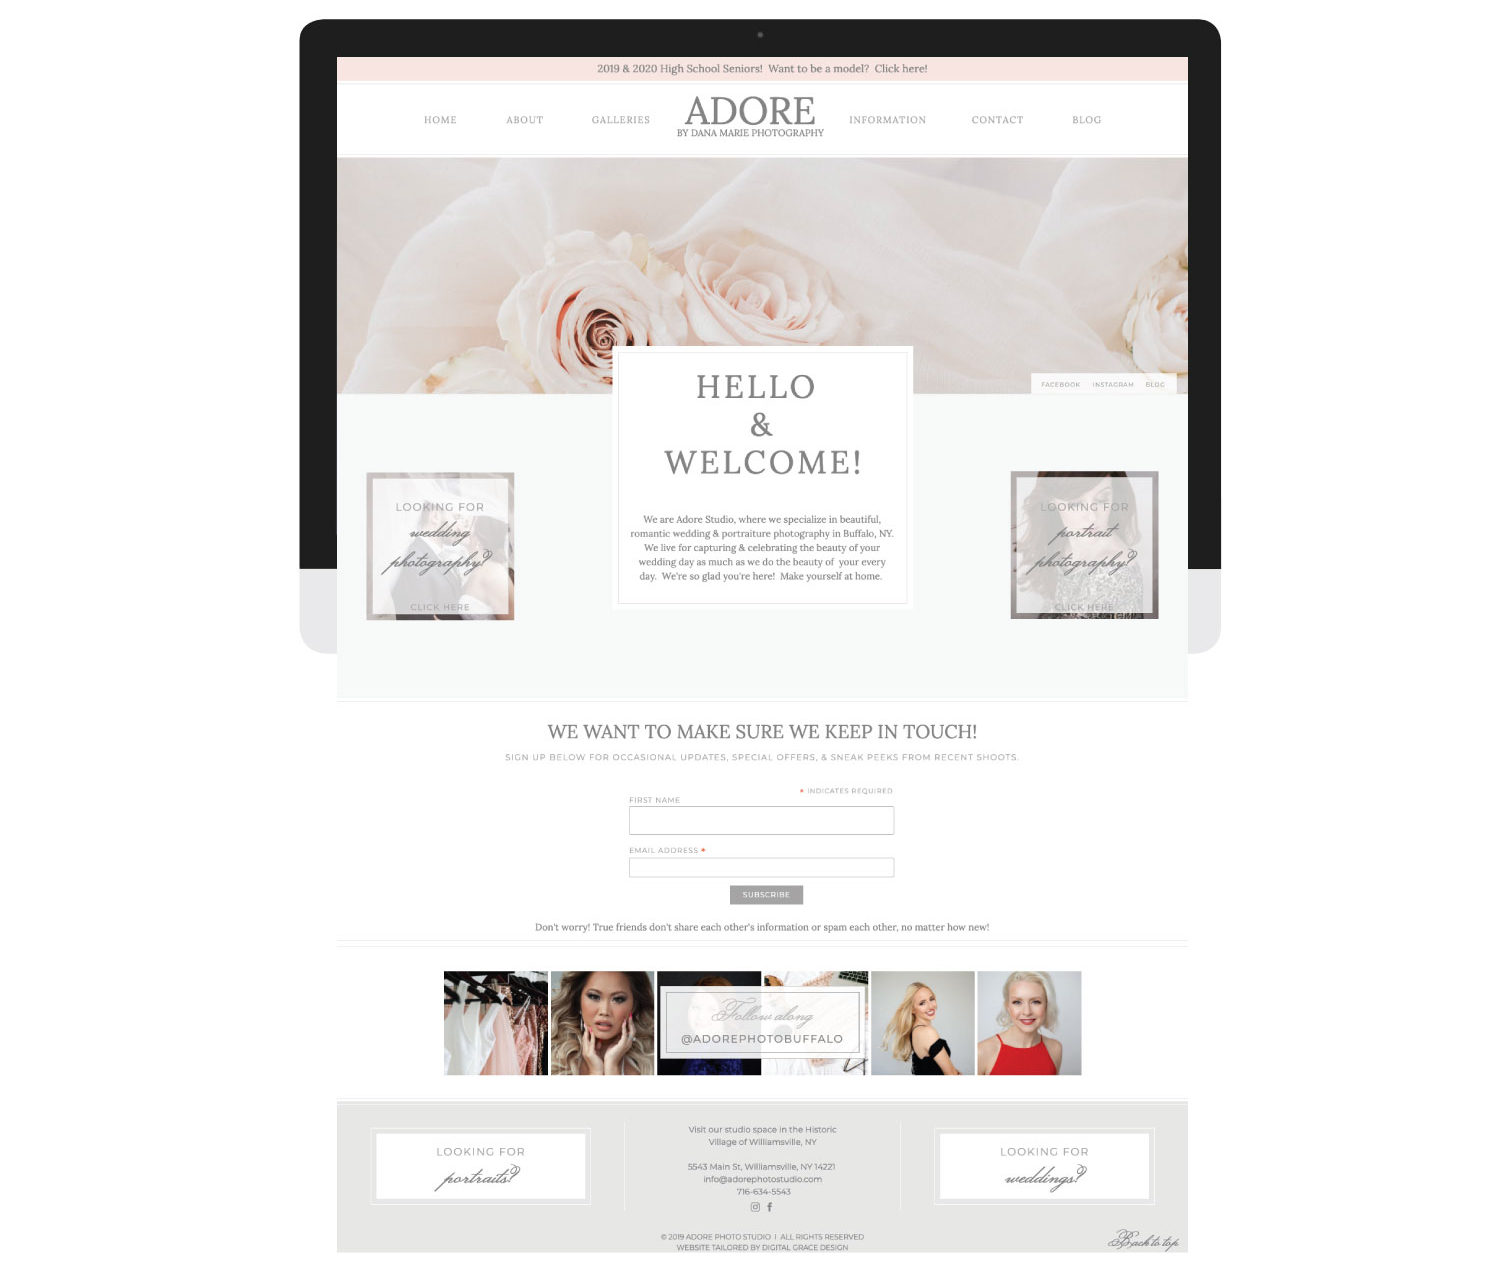 Showit Website Reveal - iMac mockup with Adore Photo Studio's home page before